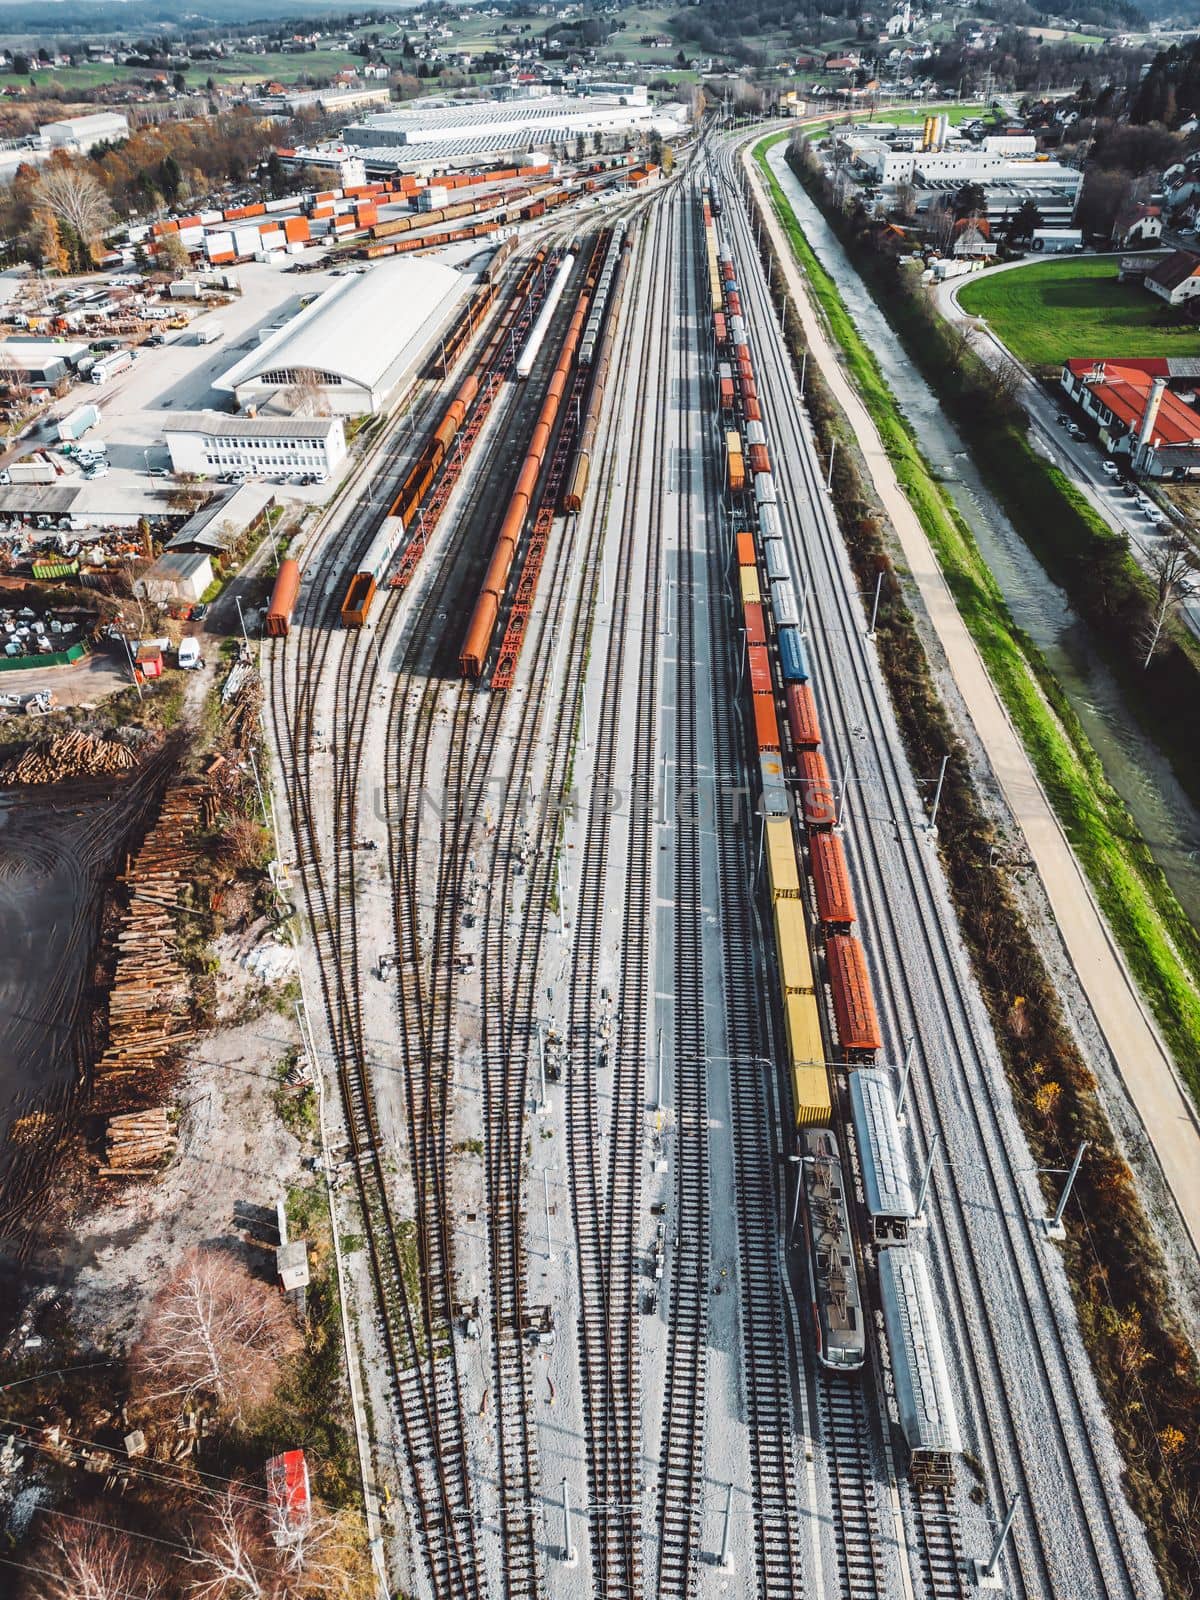 Vertical photo, aerial view of cargo trains standing still at the train station by VisualProductions